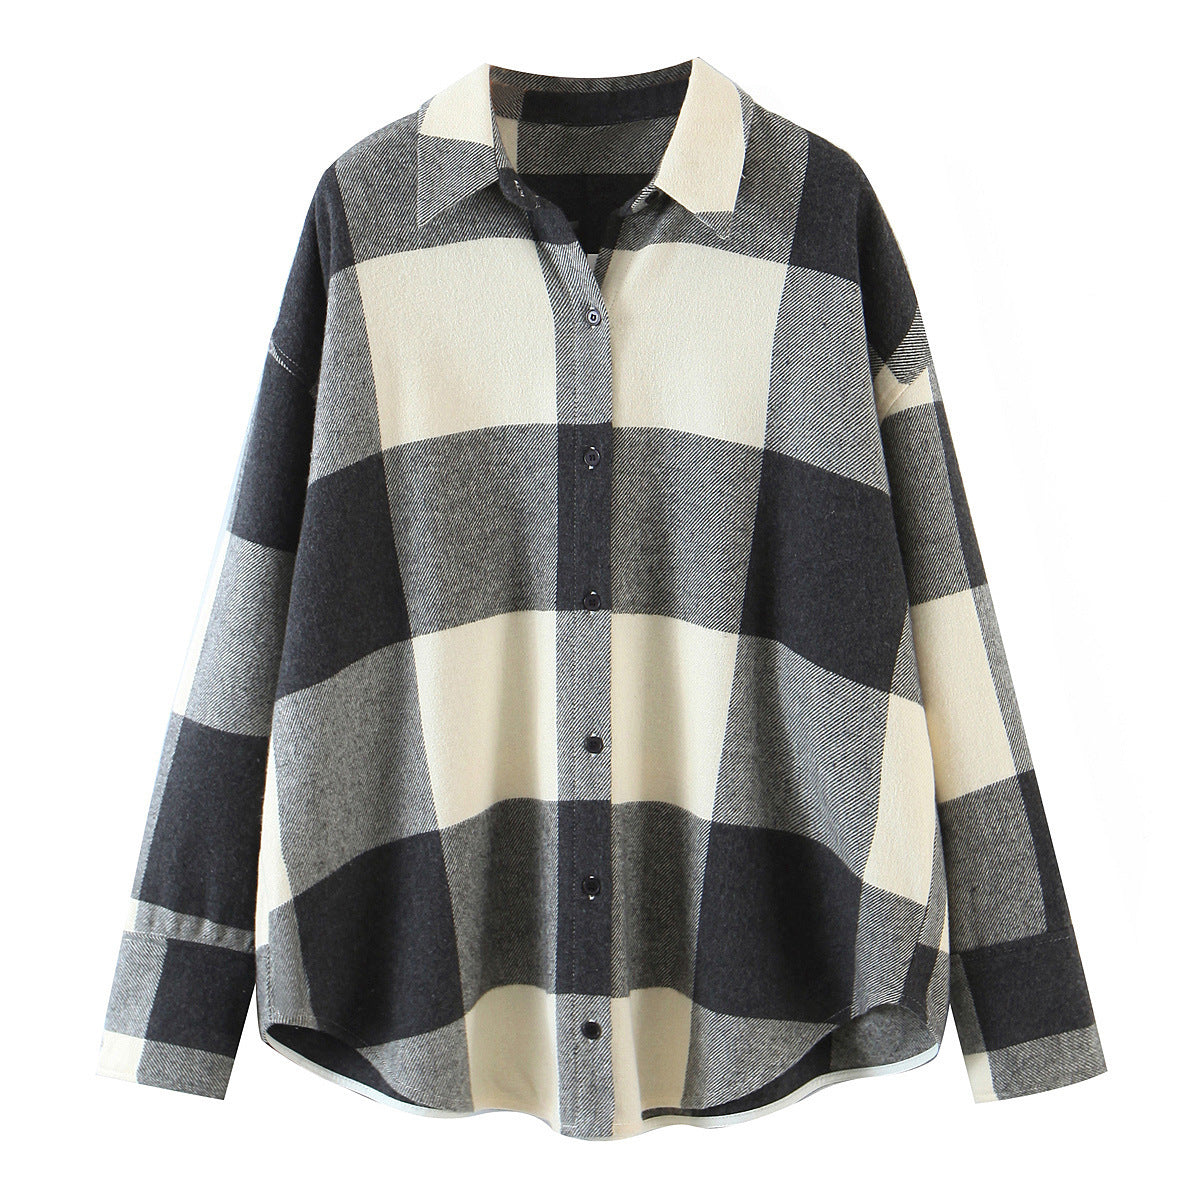 Autumn And Winter European And American Women'S Fashion Plaid Woolen Loose Shirt Jacket Coat